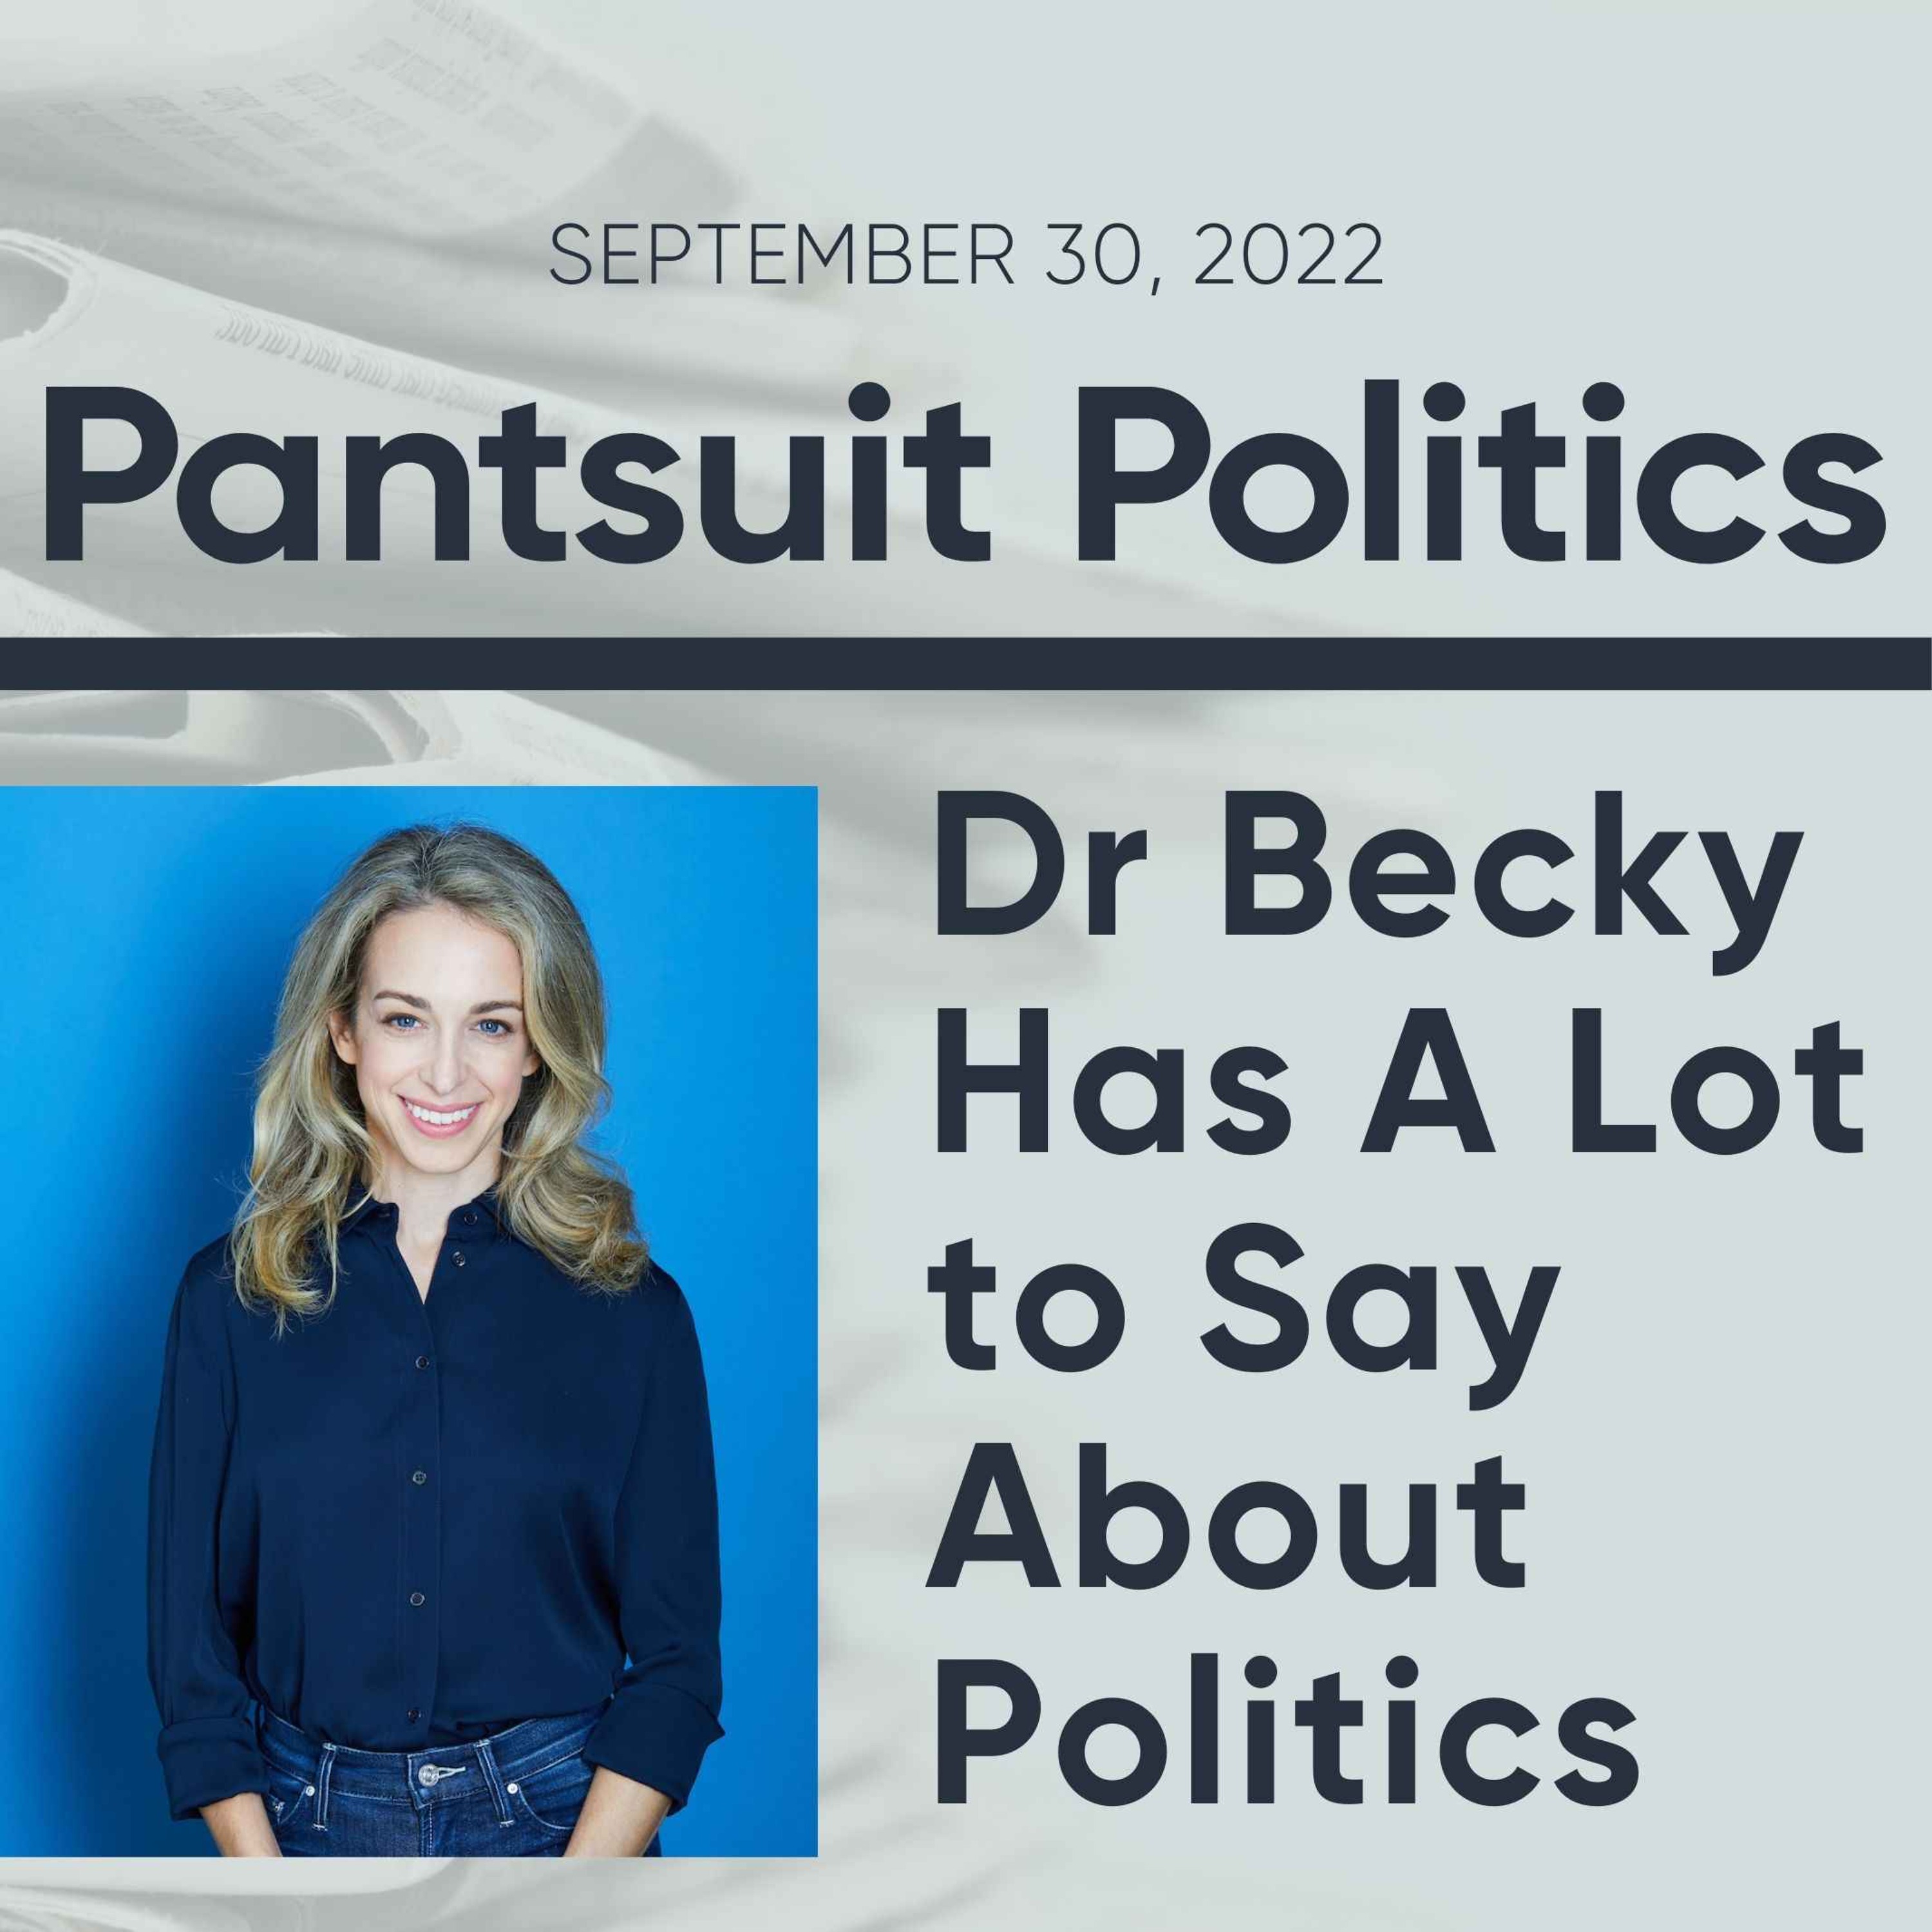 Dr. Becky Has A Lot to Say About Politics